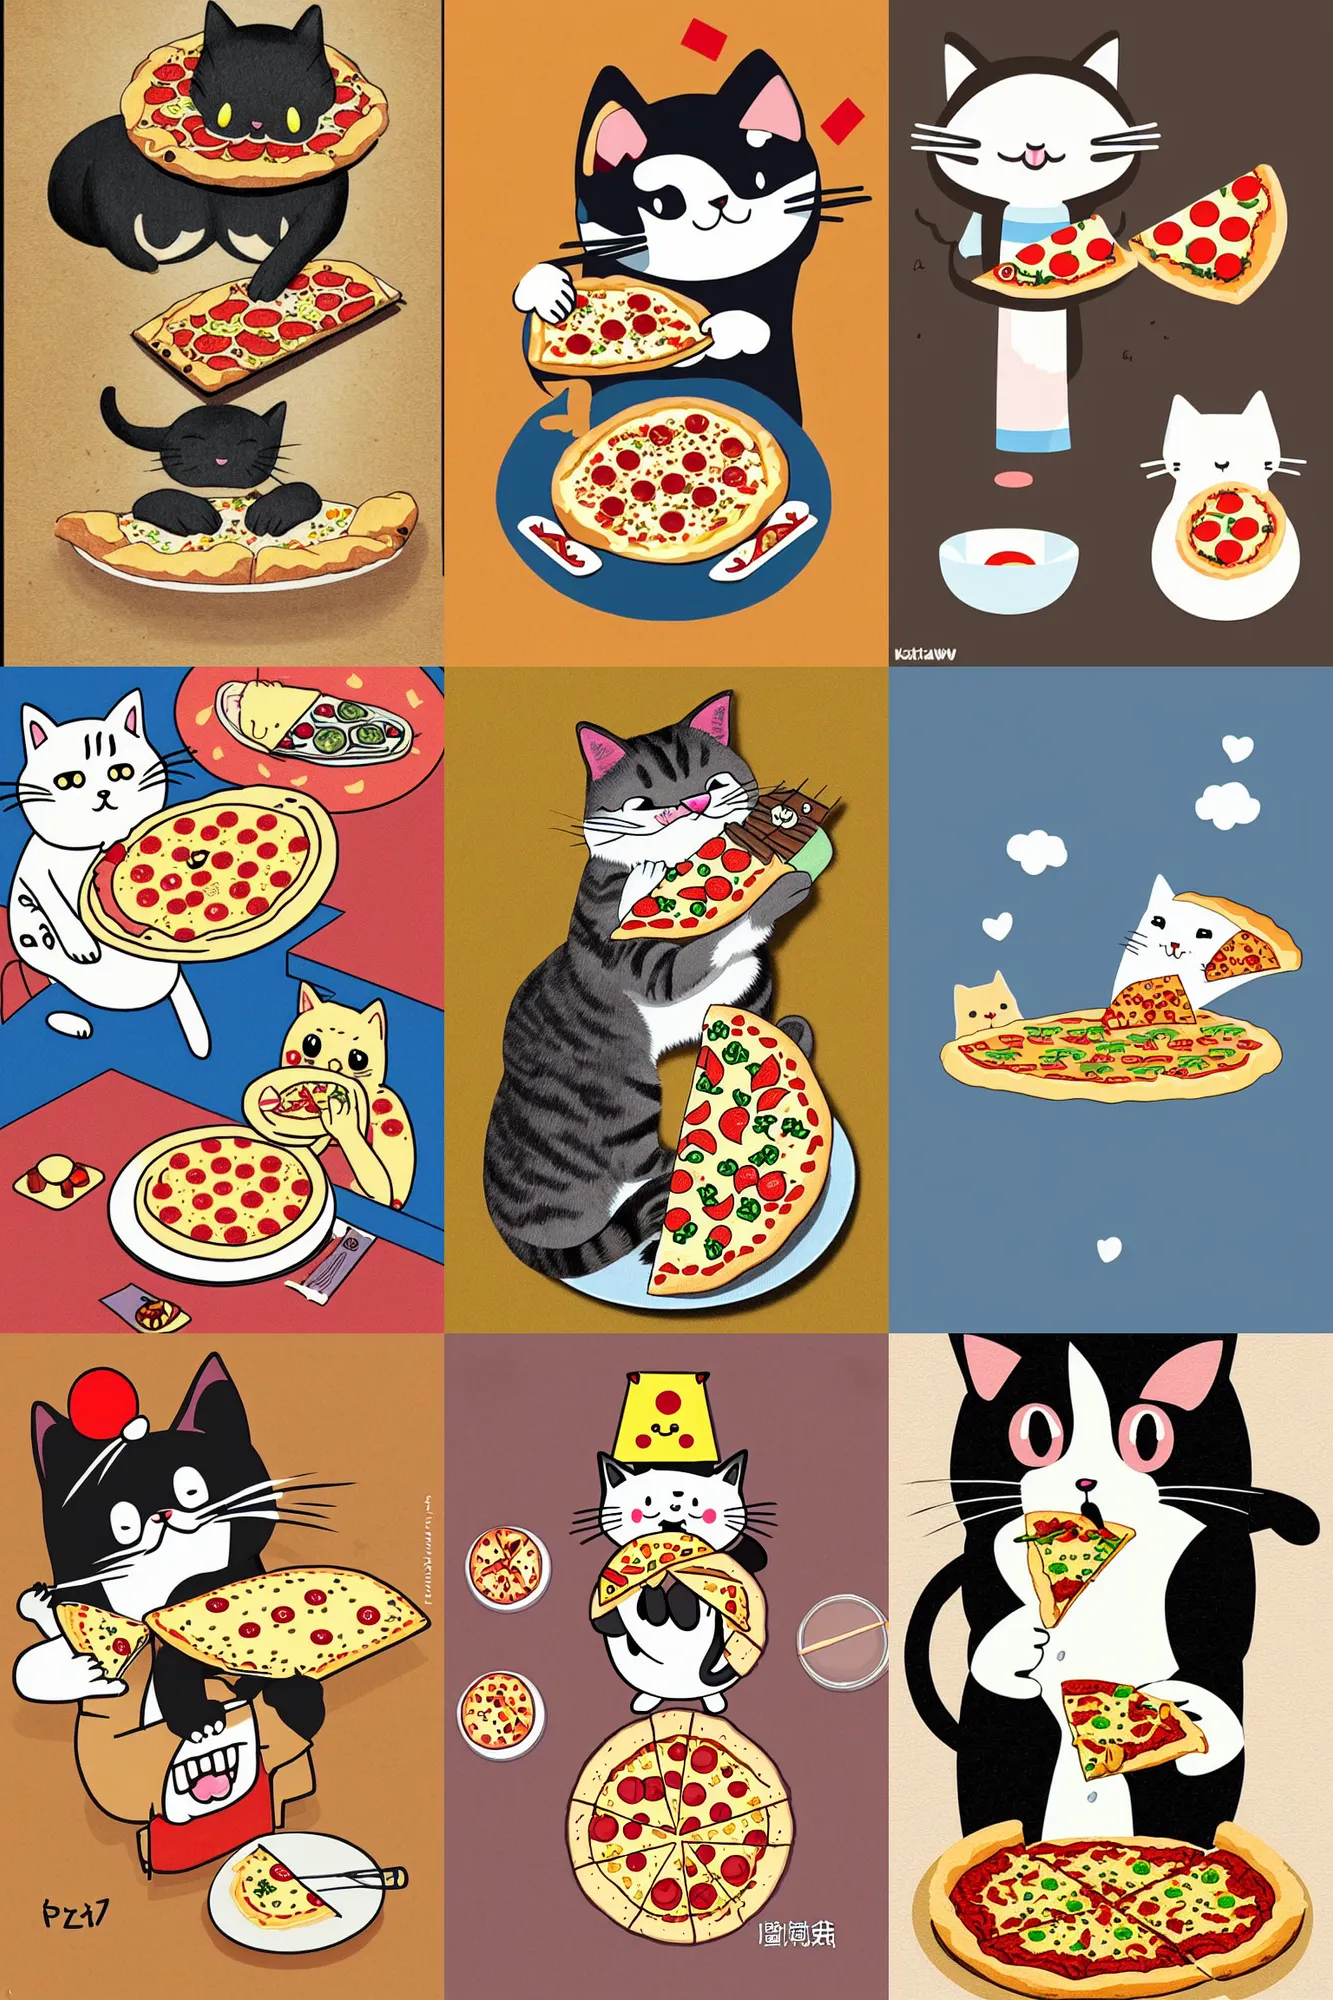 Prompt: Kawaii illustration of a cat eating pizza, japanese cute